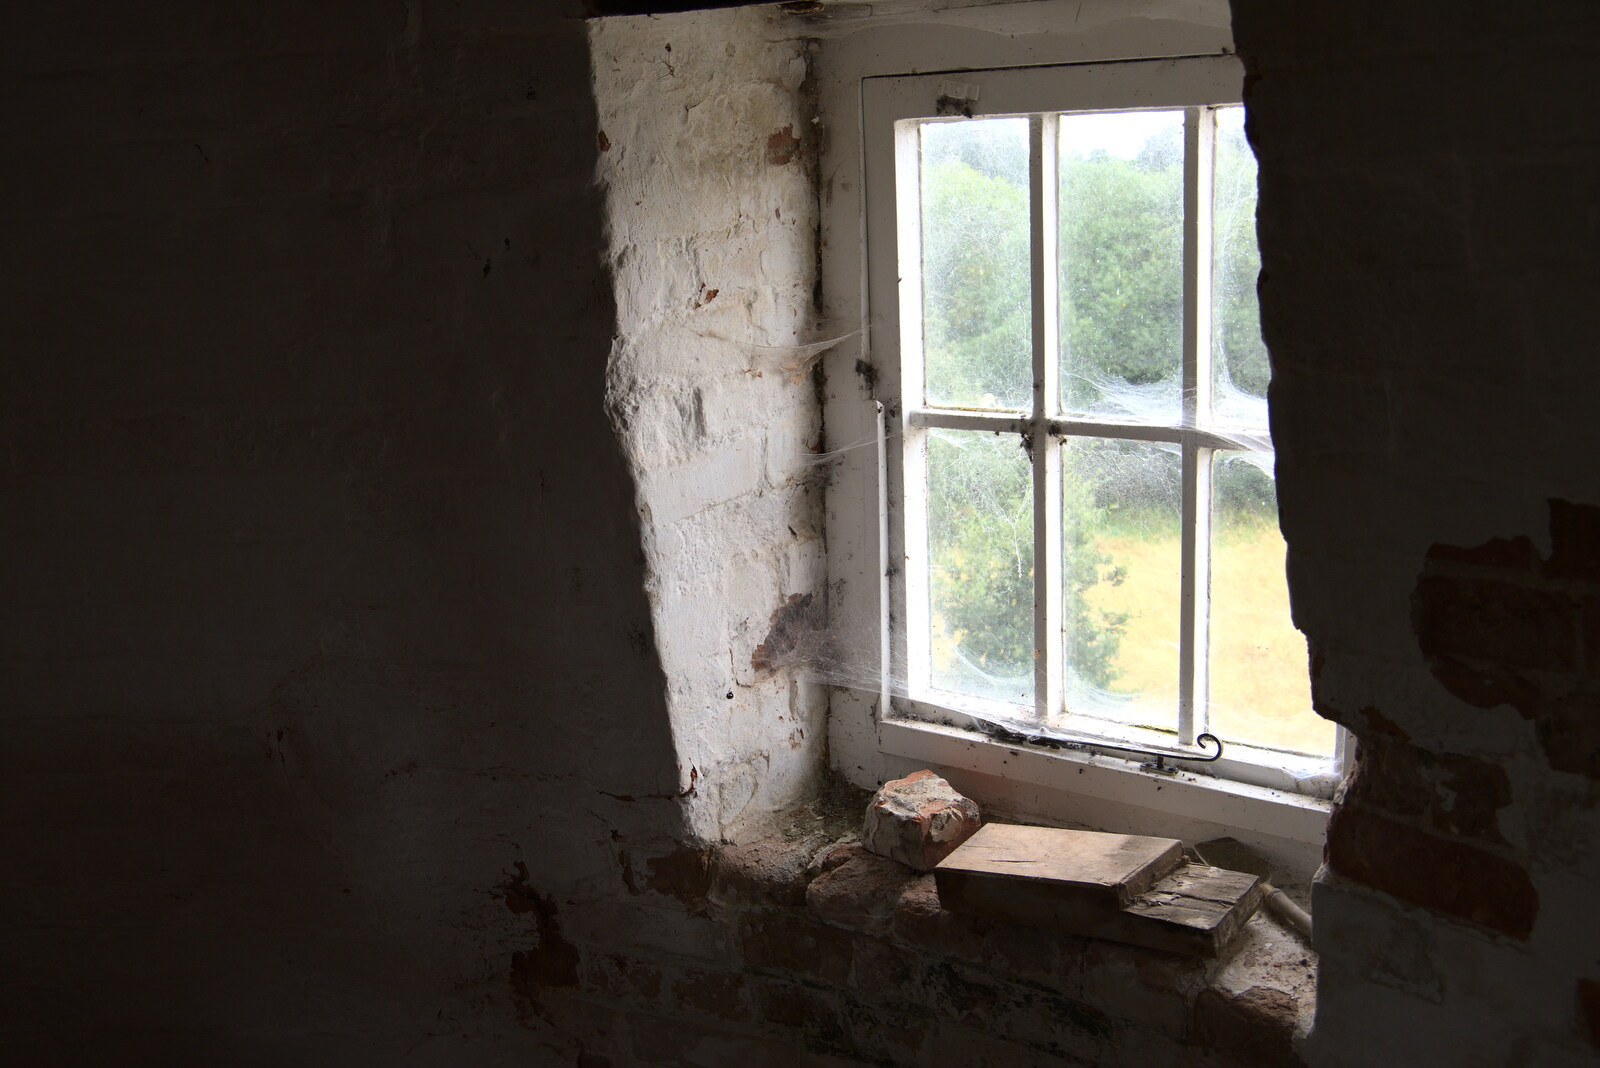 A cobwebby window from An Open Day at the Windmill, Billingford, Norfolk - 21st August 2021